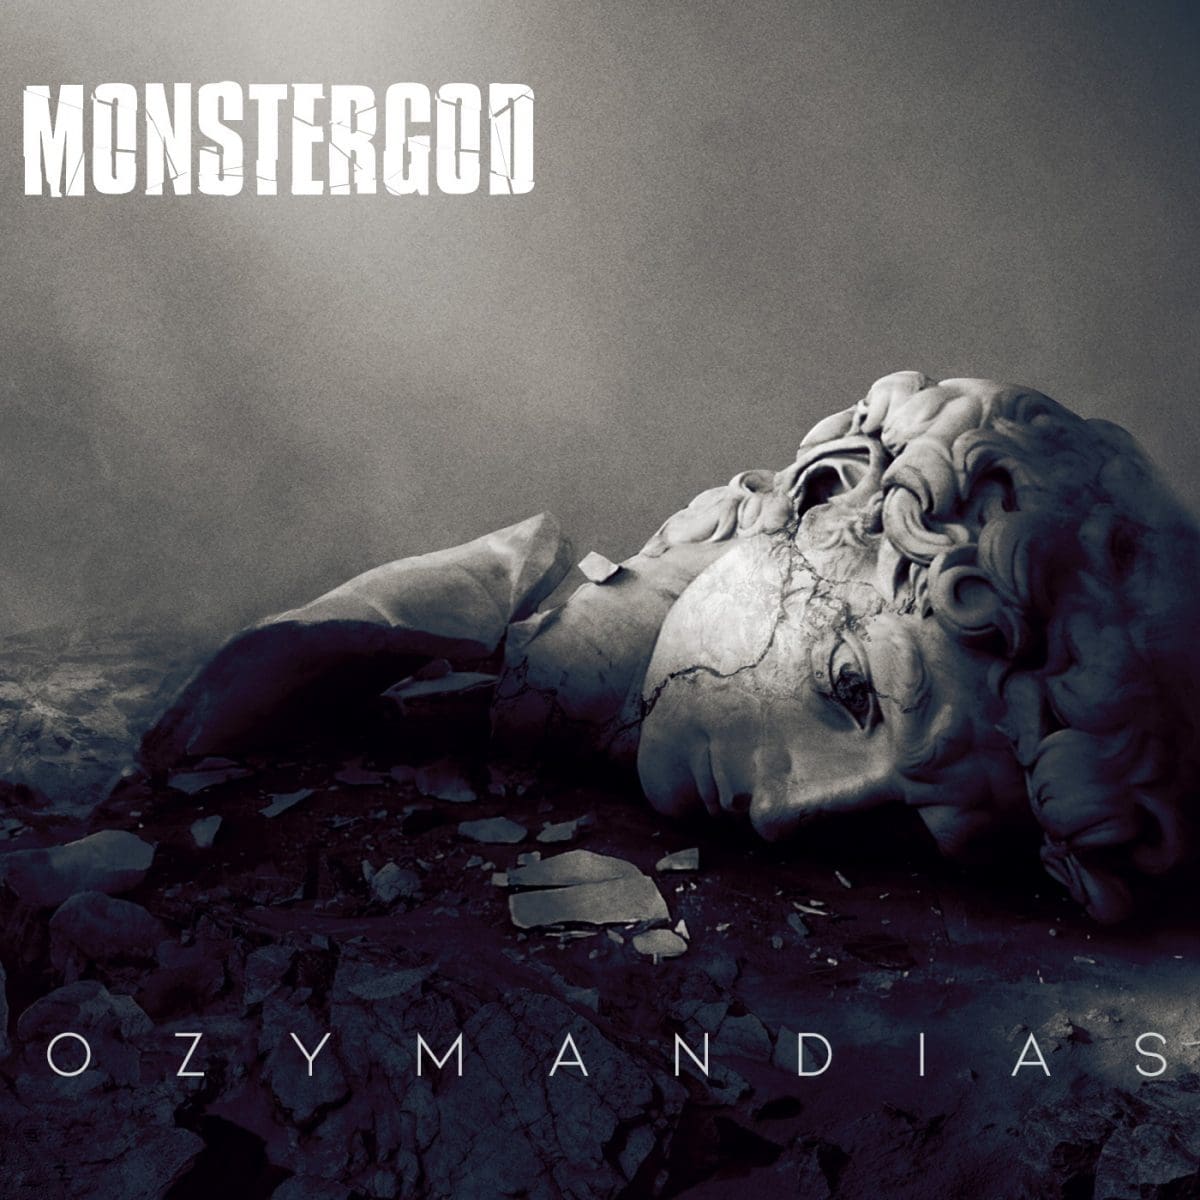 ‘click Interview’ with Monstergod: ‘i See “ozymandias” As a Final Chapter of Monstergod History’